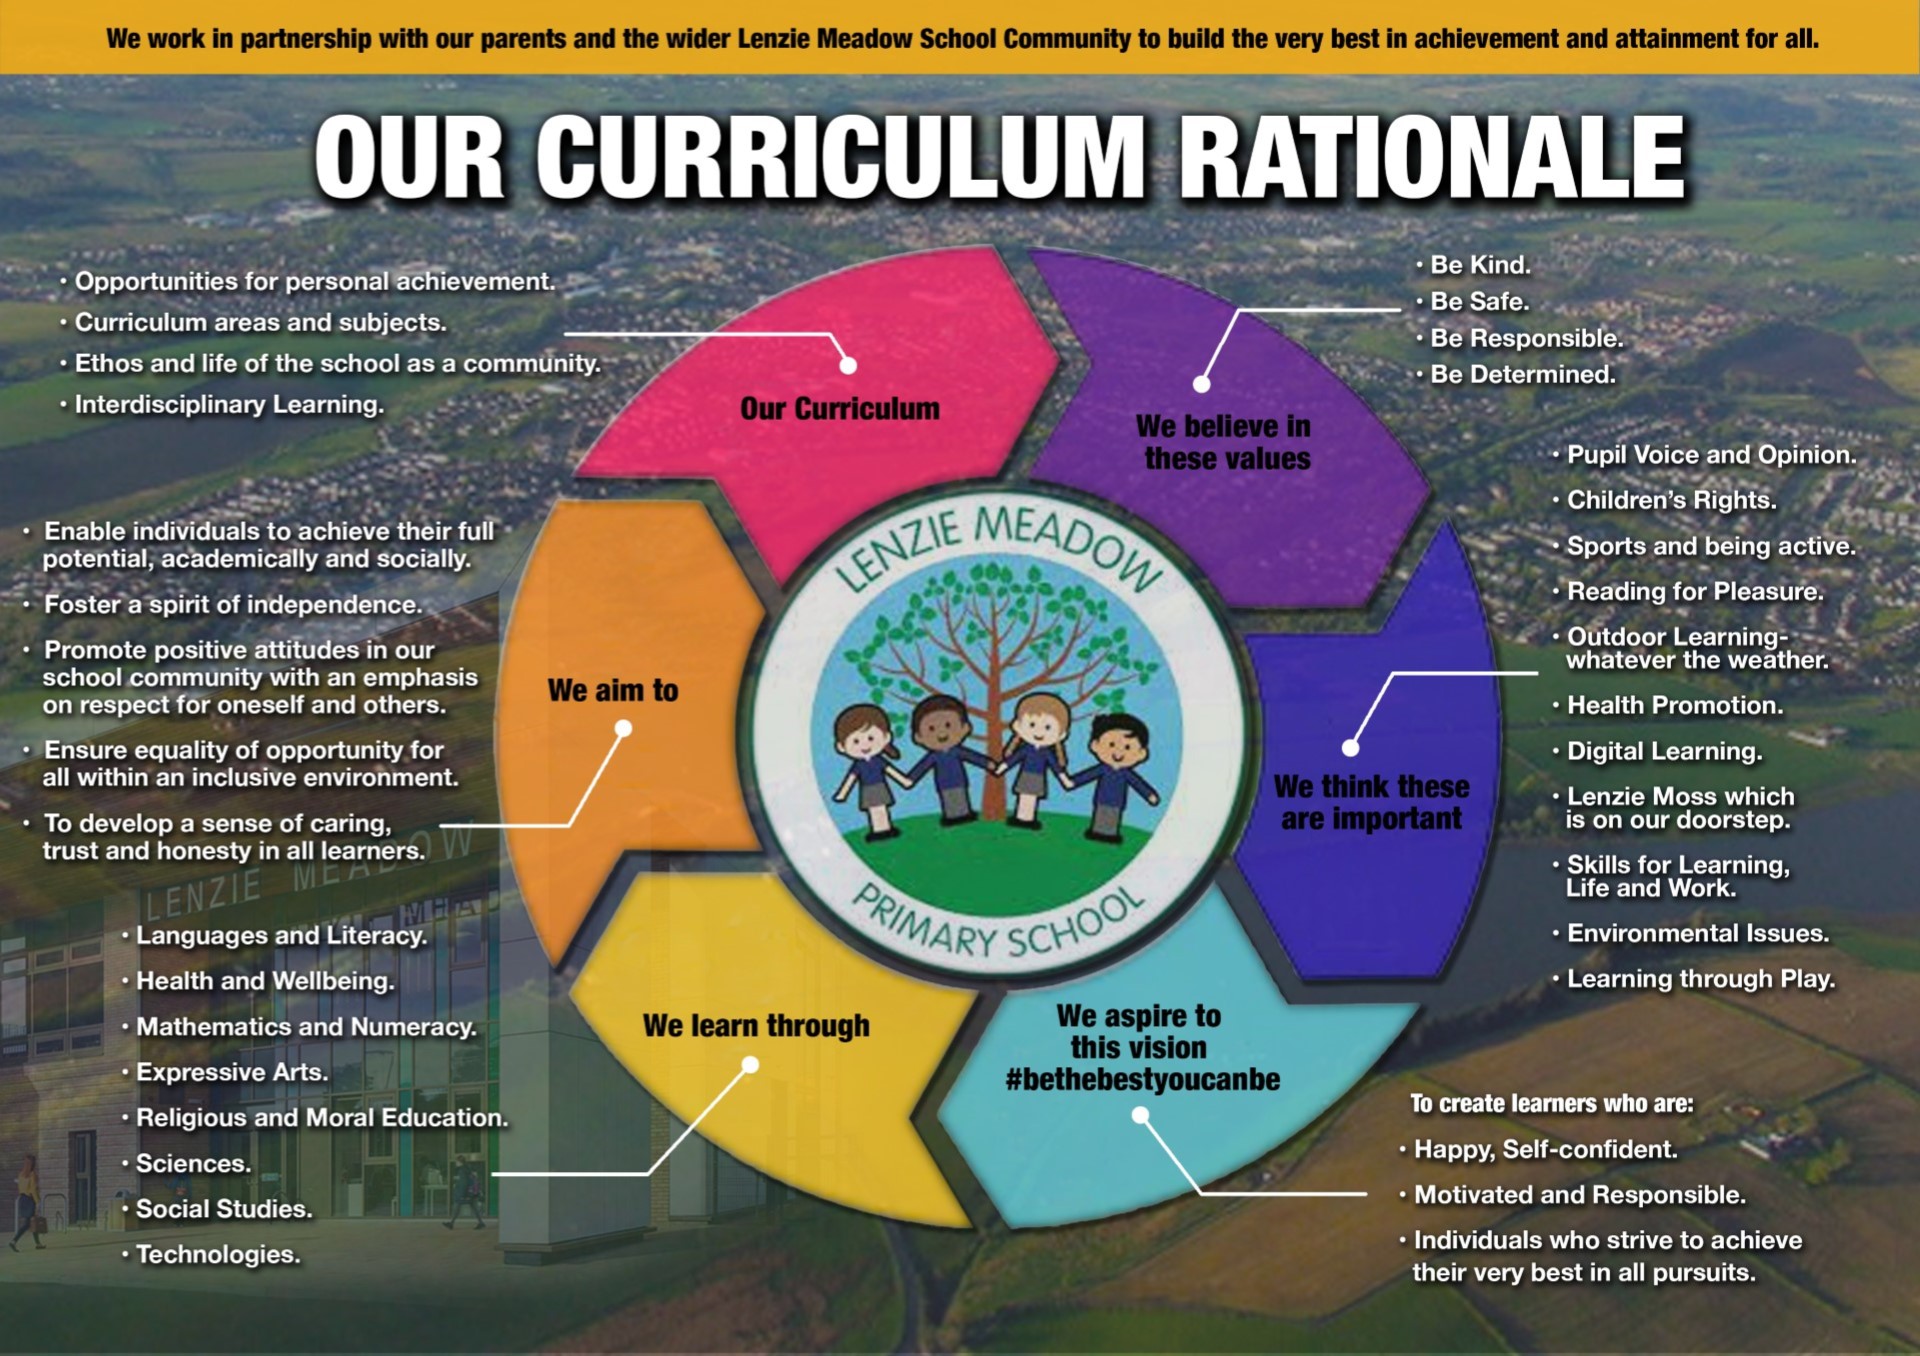 Our curriculum rationale